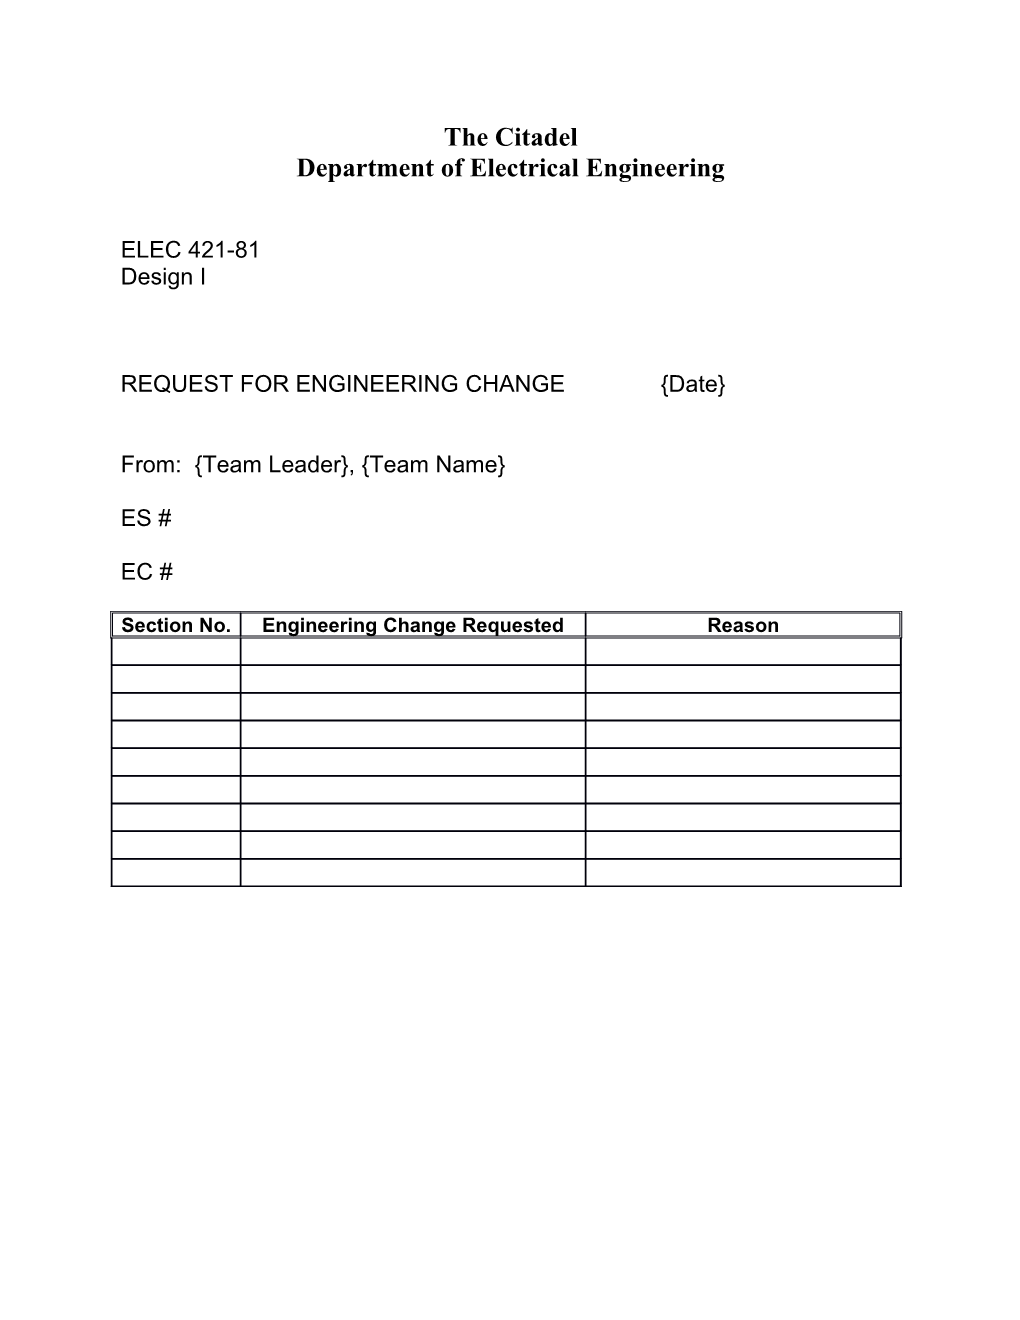 Department of Electrical Engineering